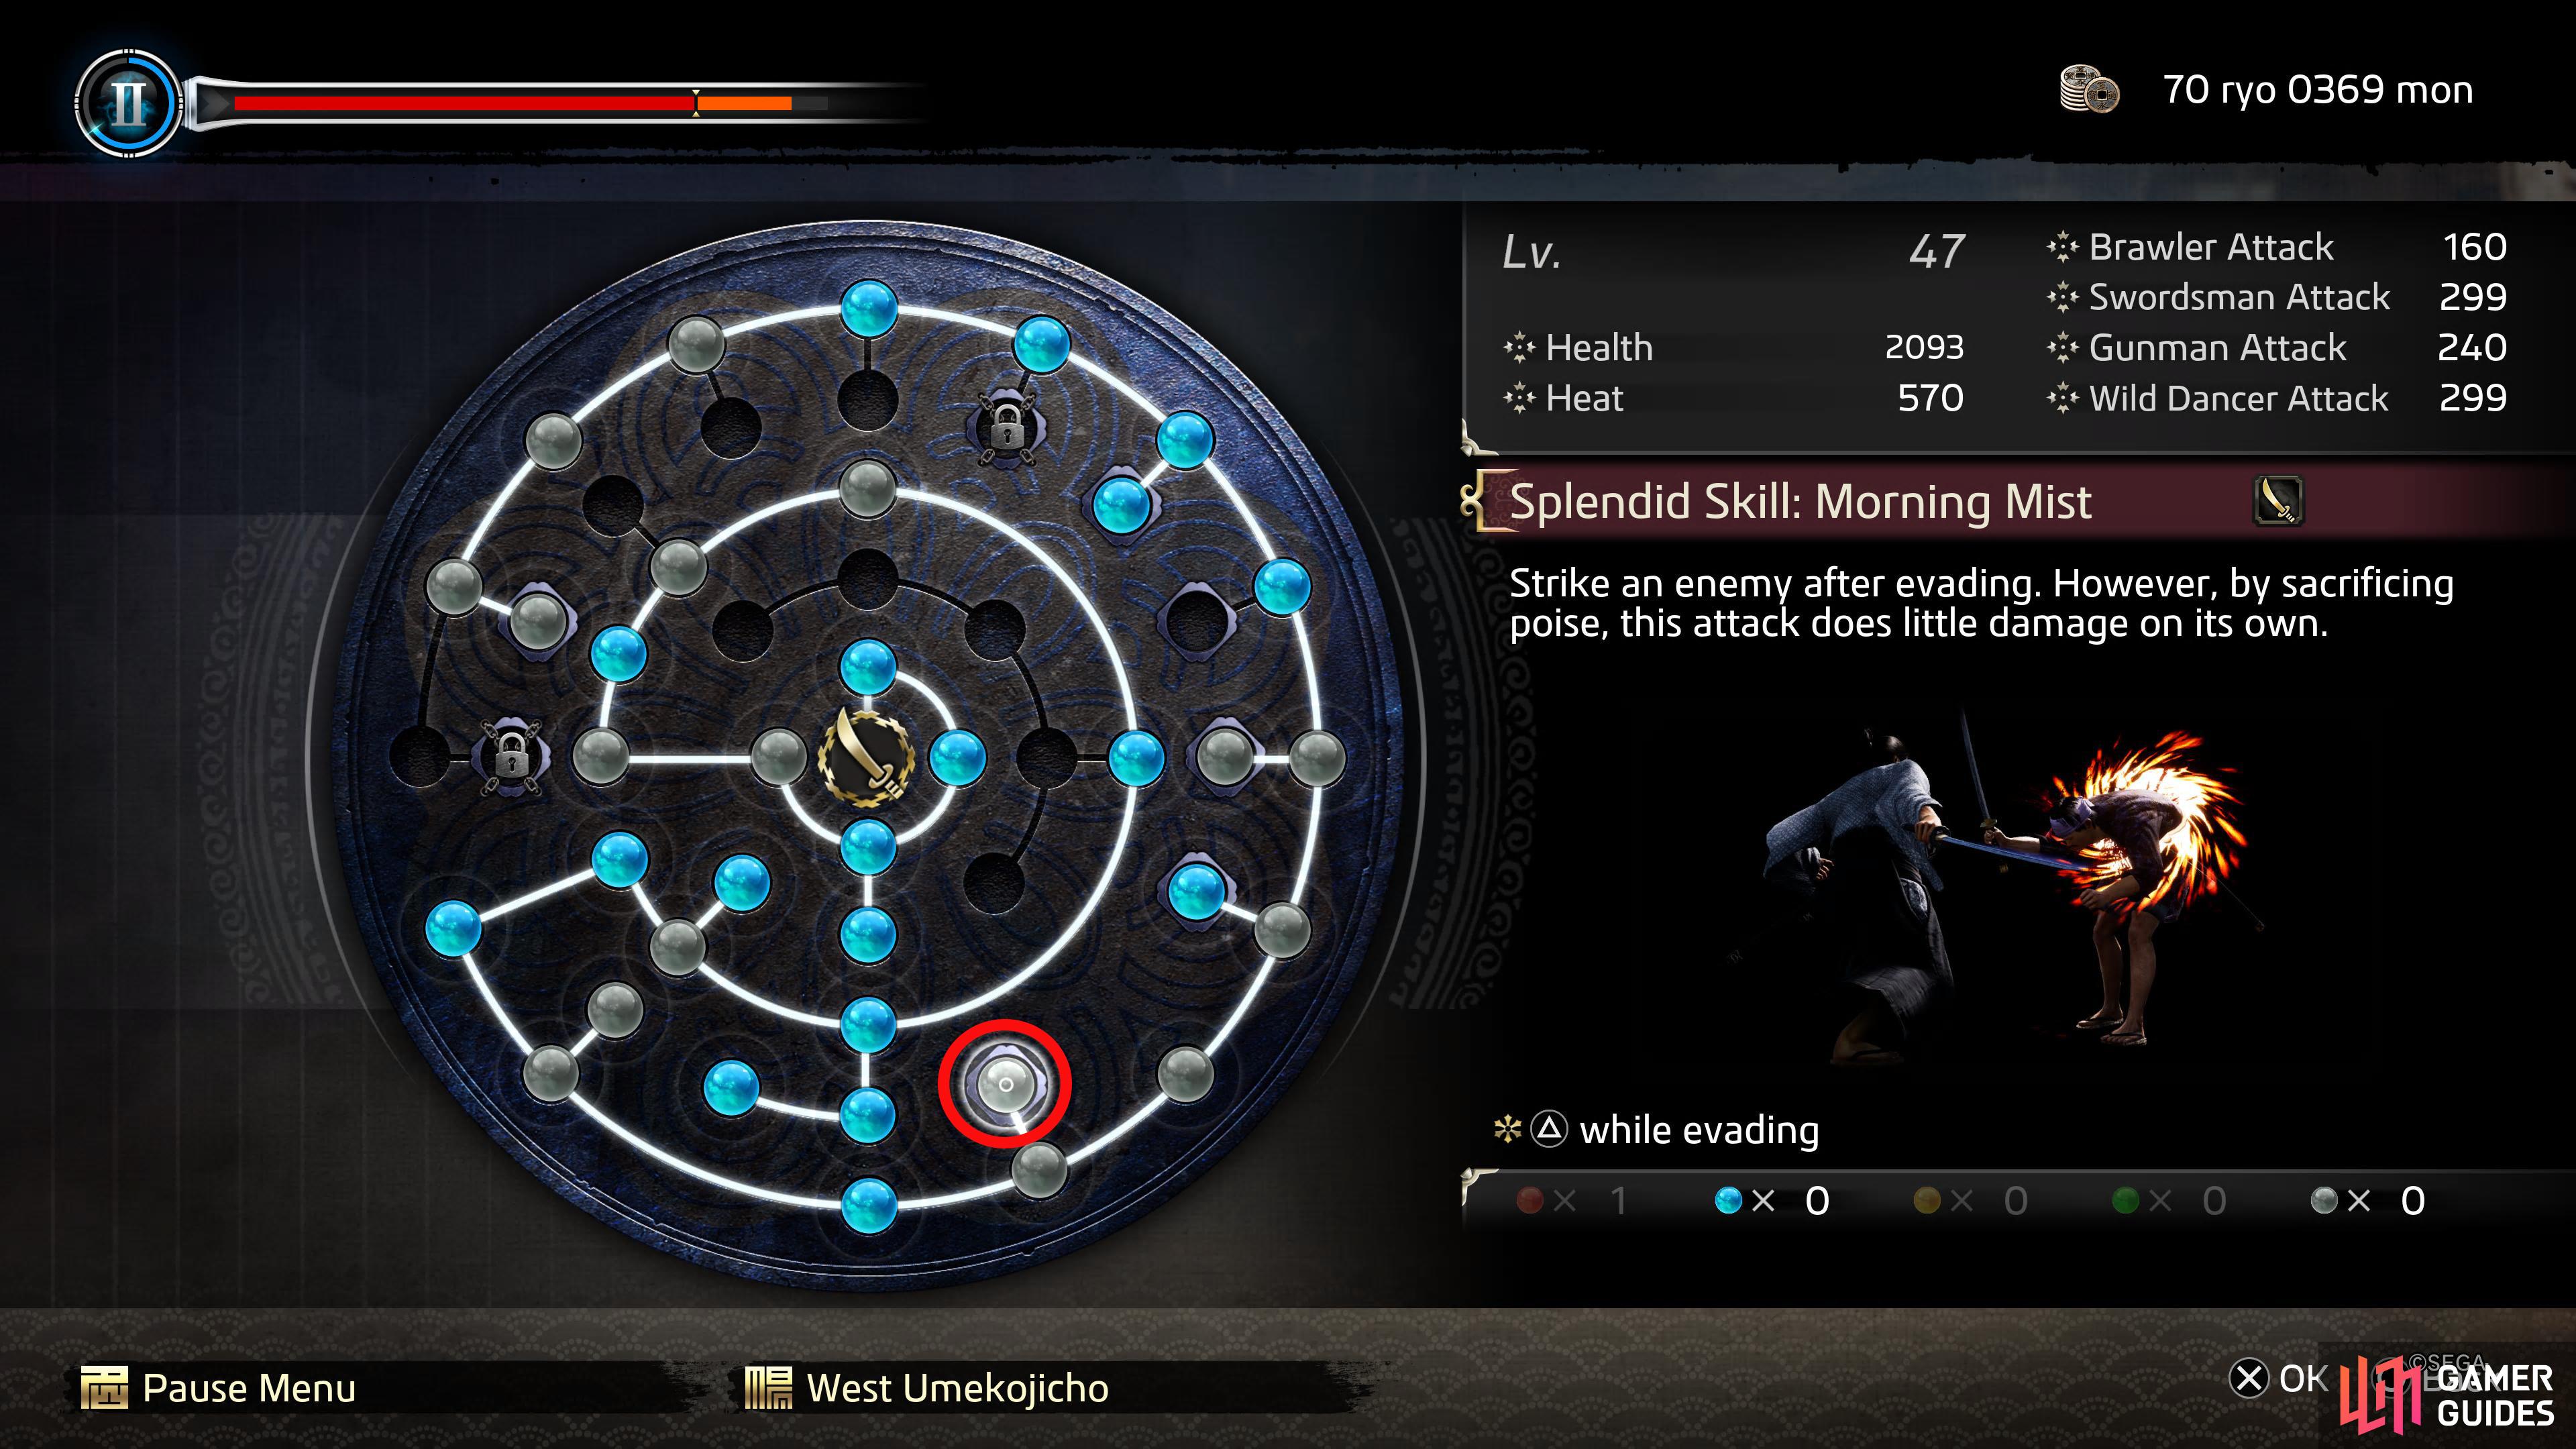 Here is where you’ll find Morning Mist on the Ability Wheel.